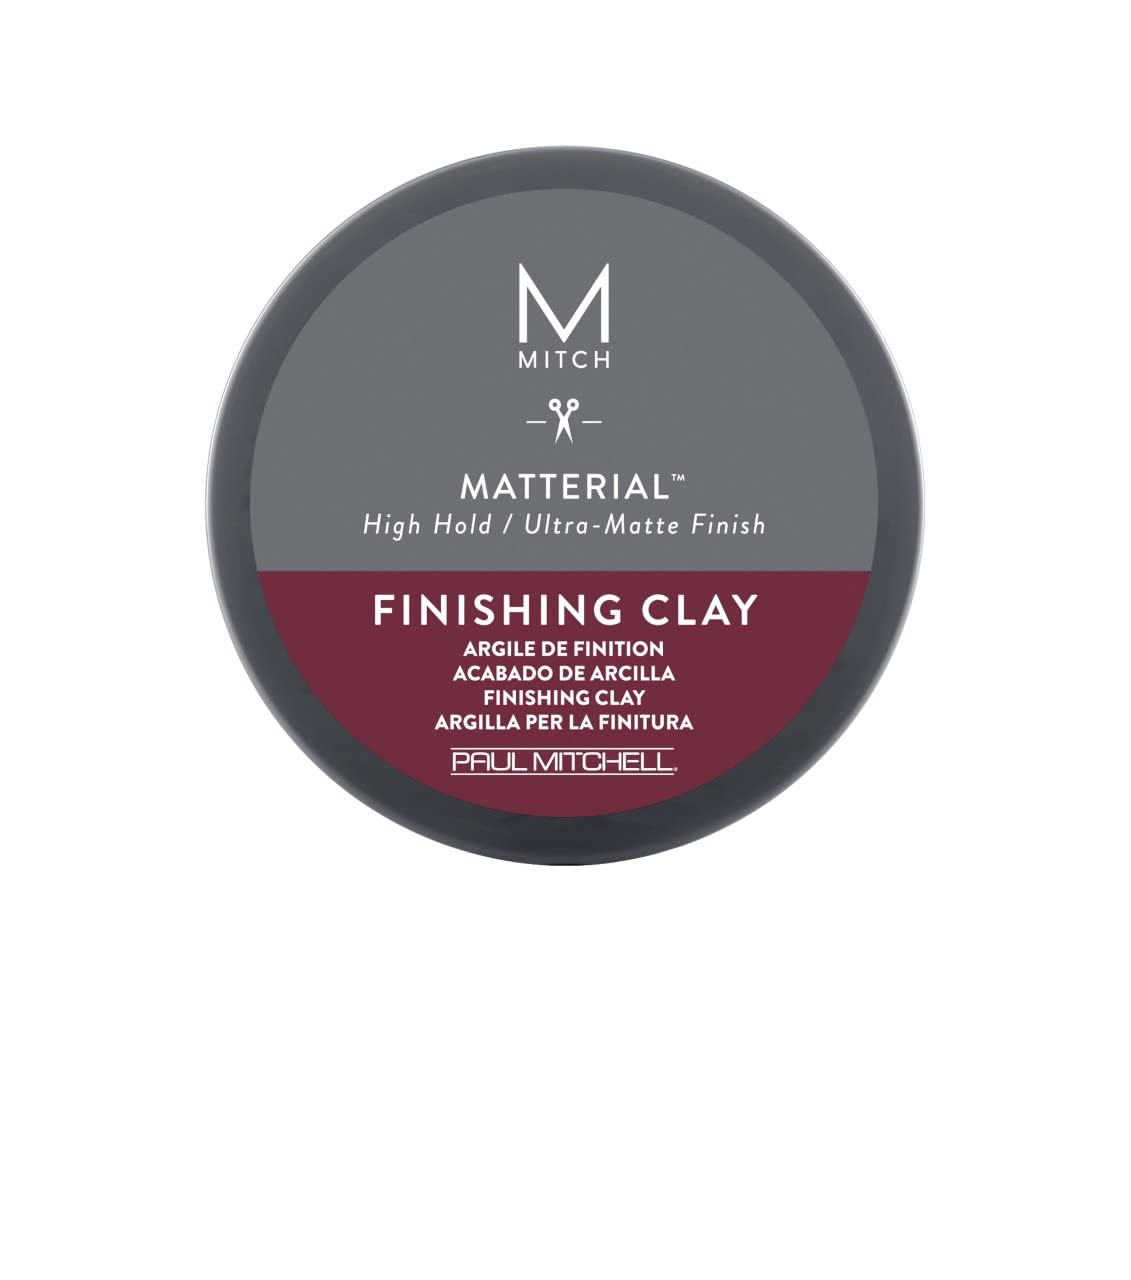 MITCH - Matterial Styling Clay DUO